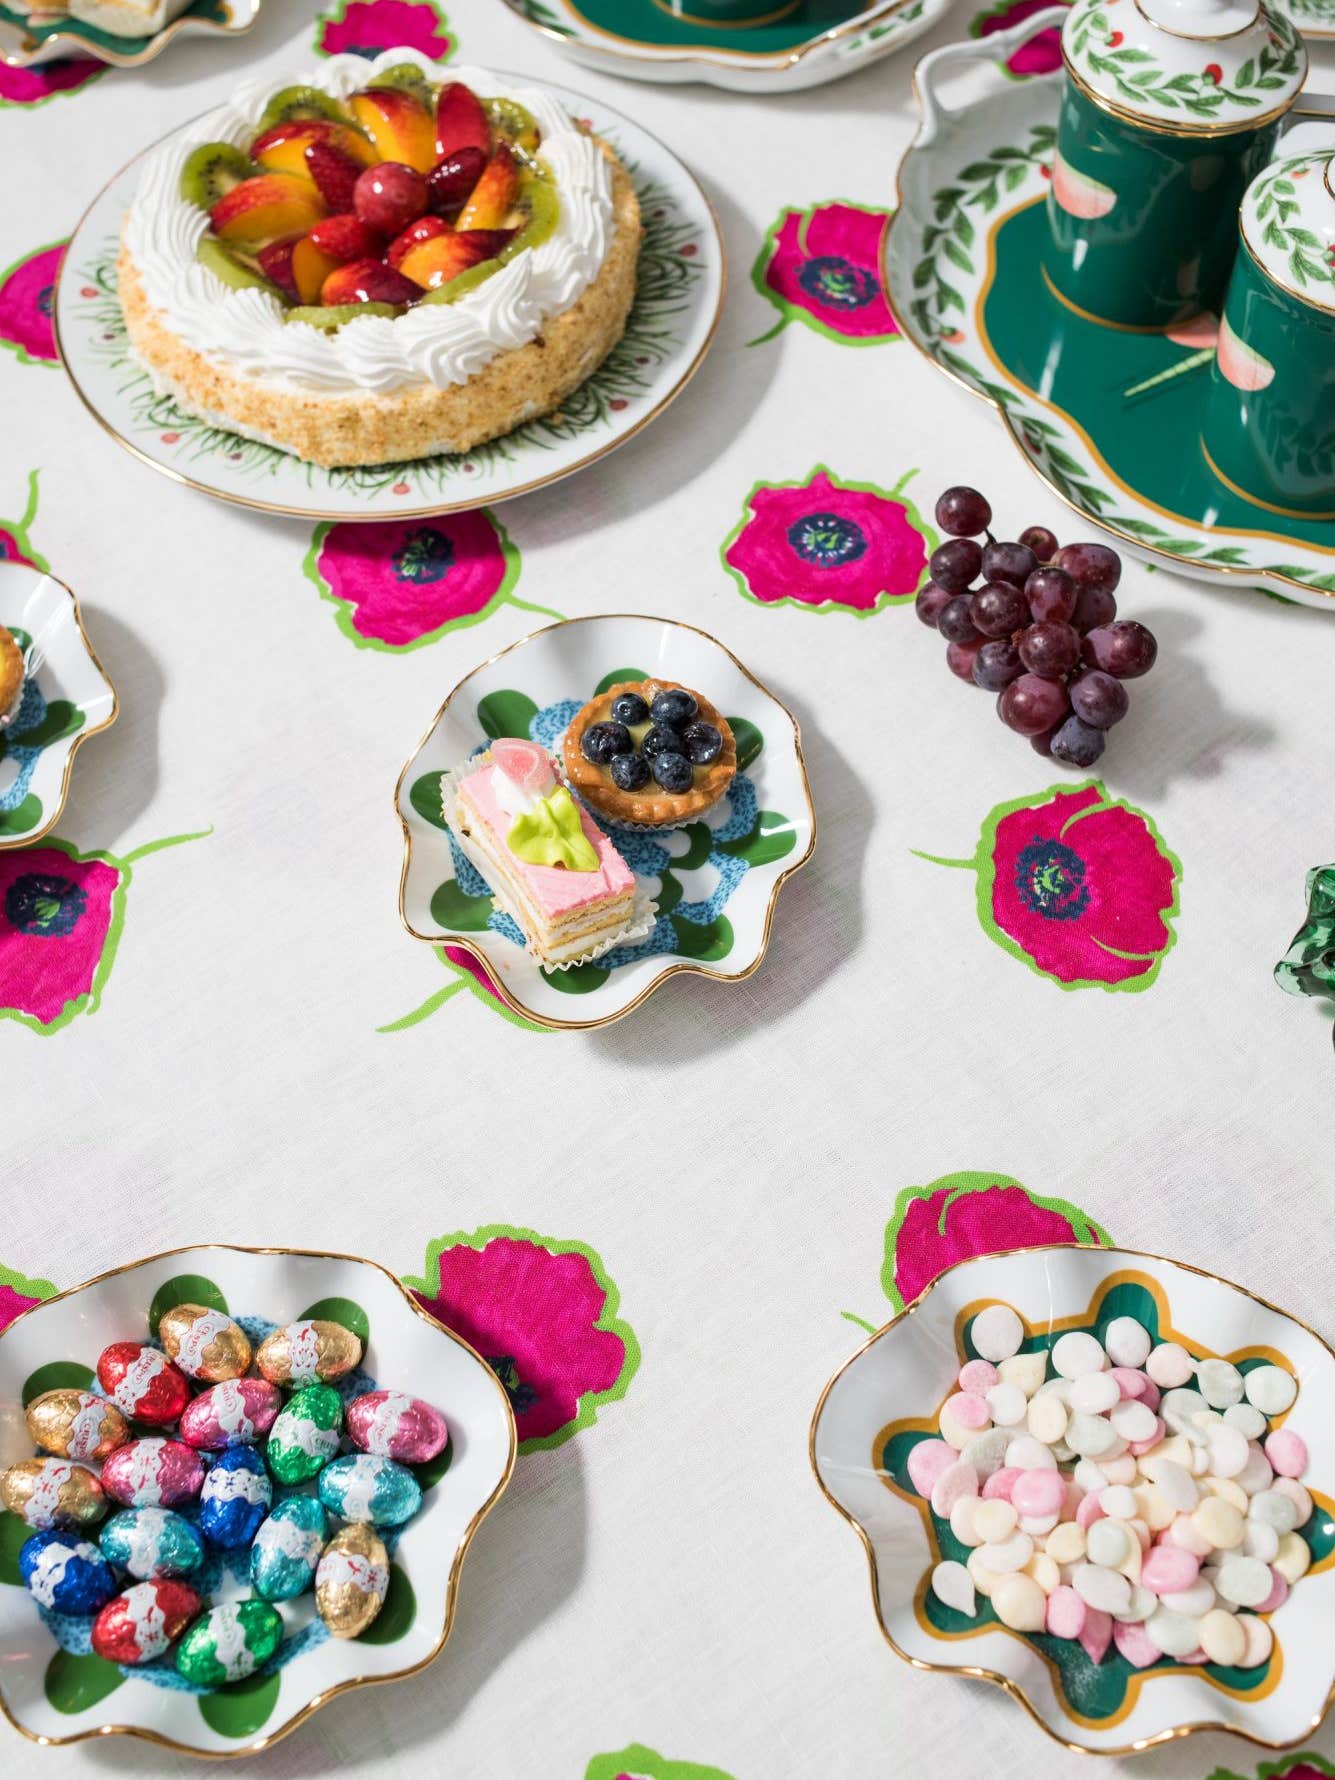 Revive the Classic Dinner Party With Our Editors’ Favorite Dinnerware